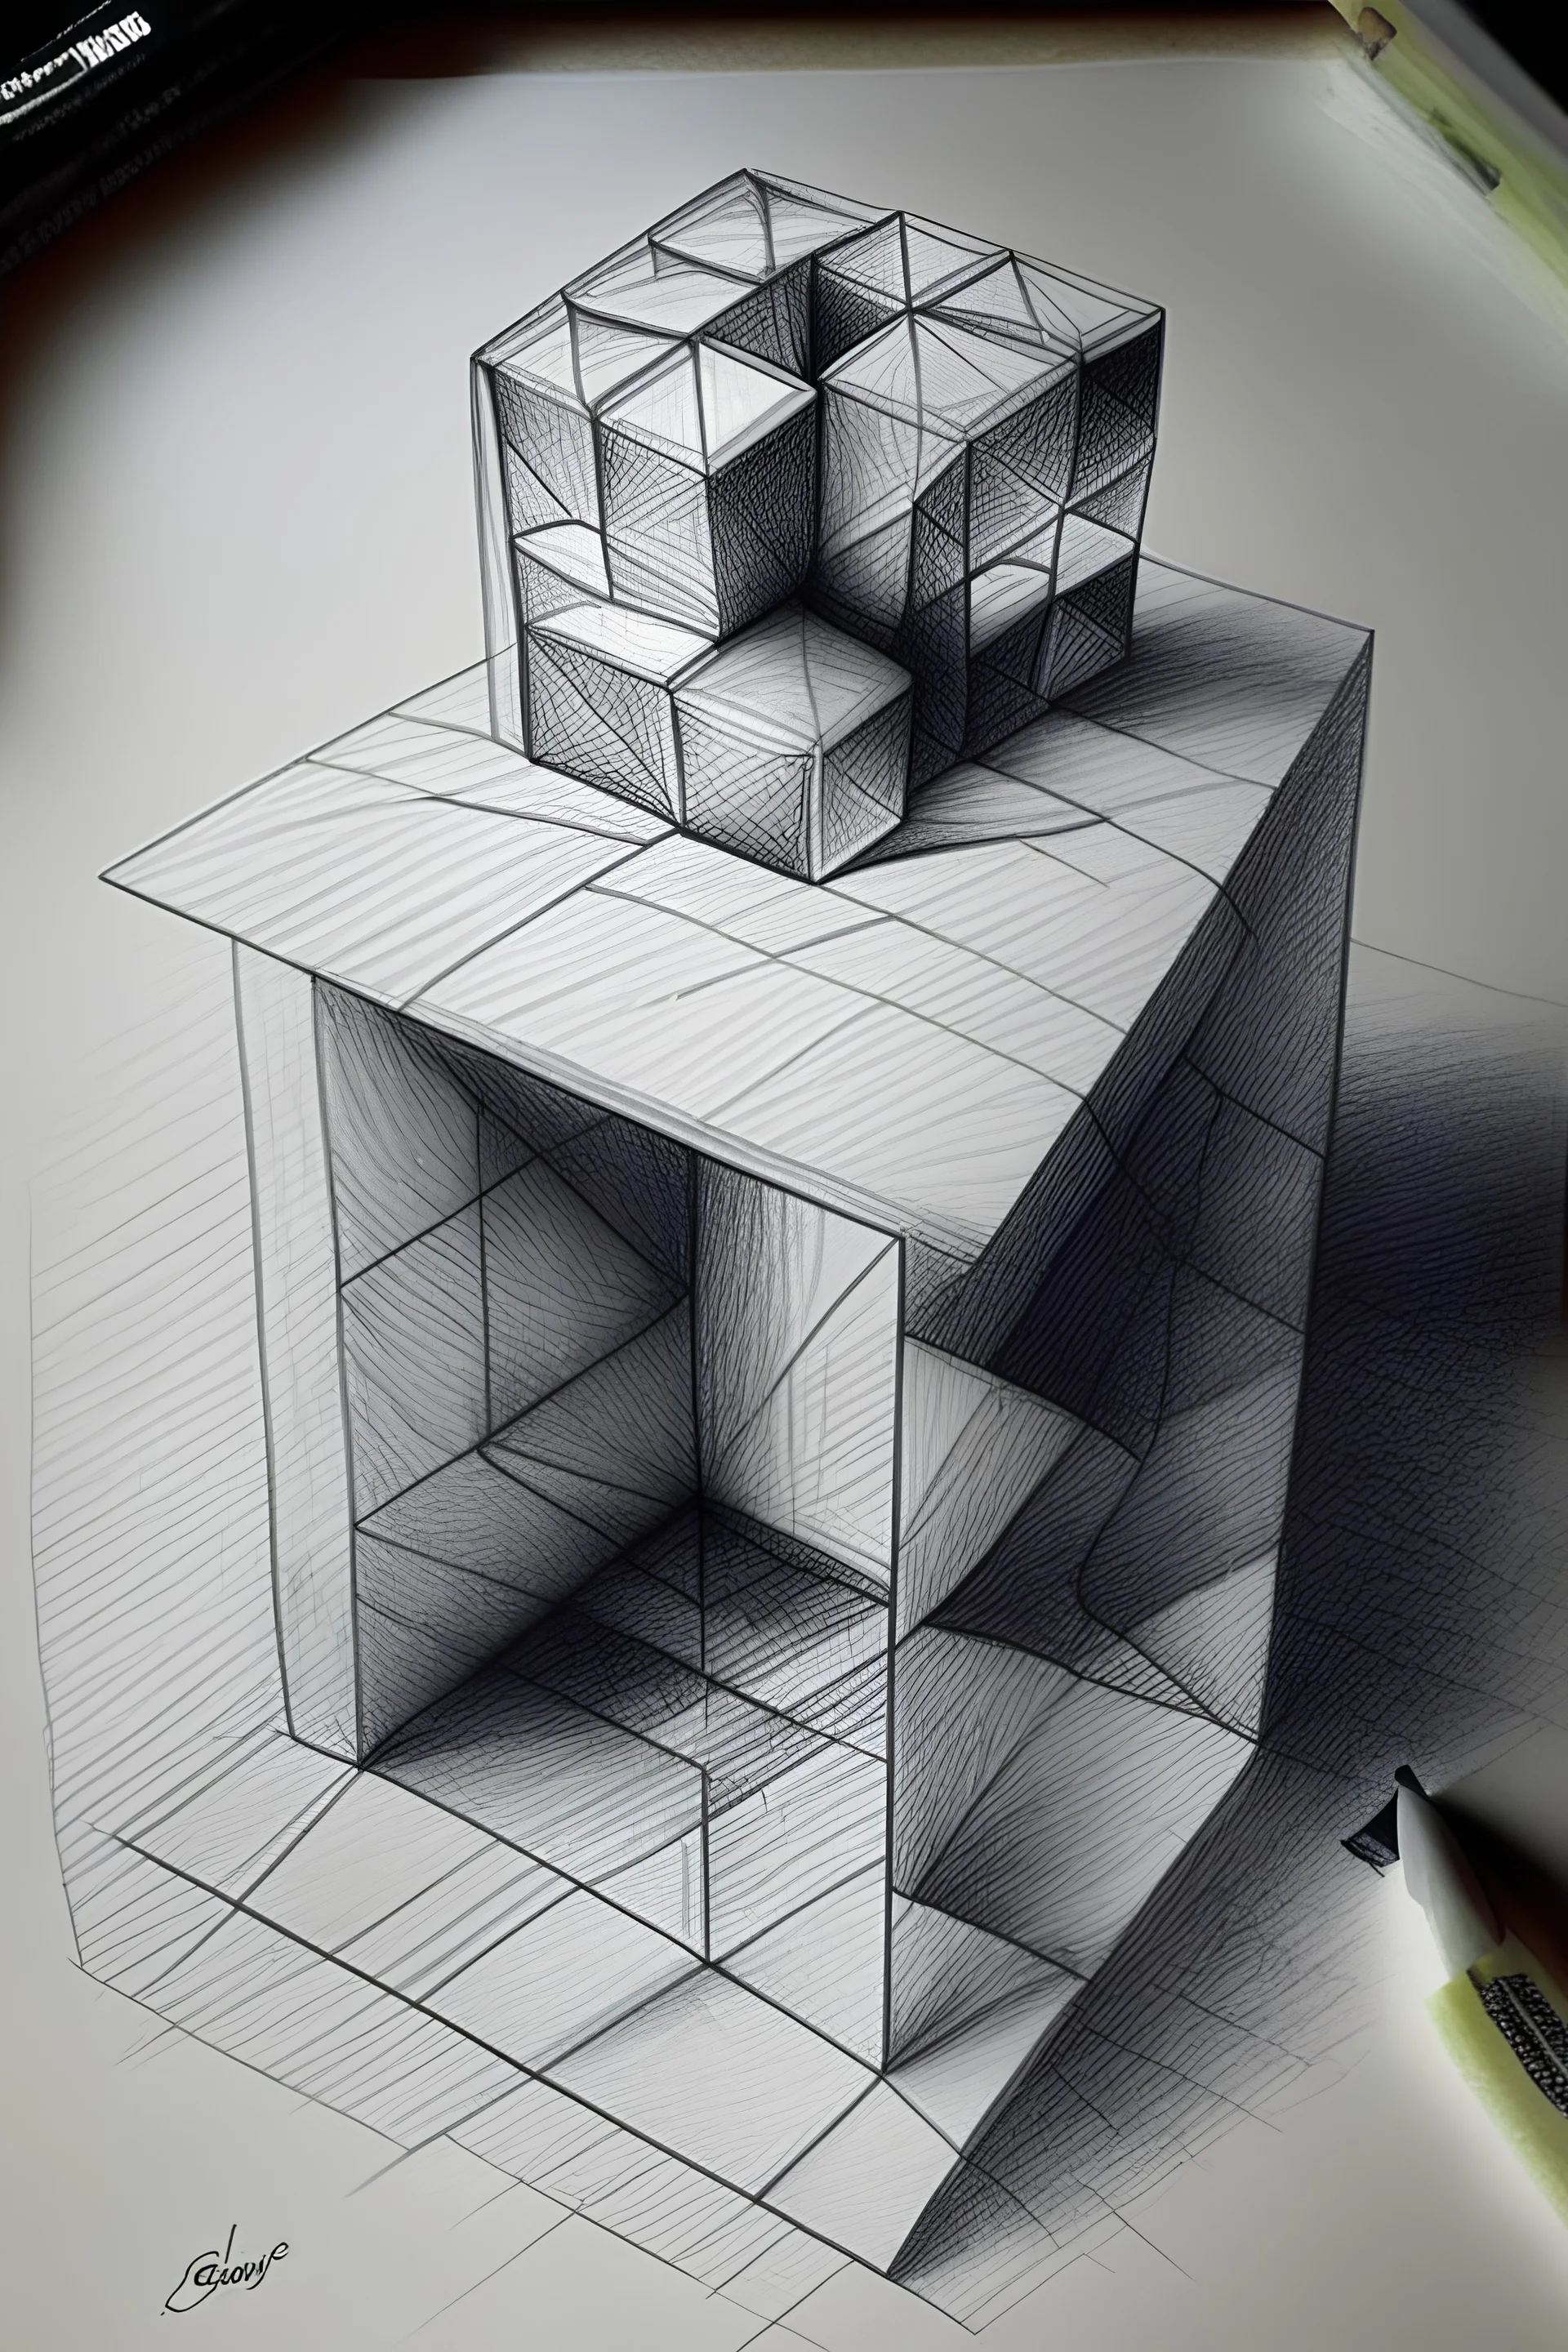 What do you think of this cube I drew? : r/Cubers